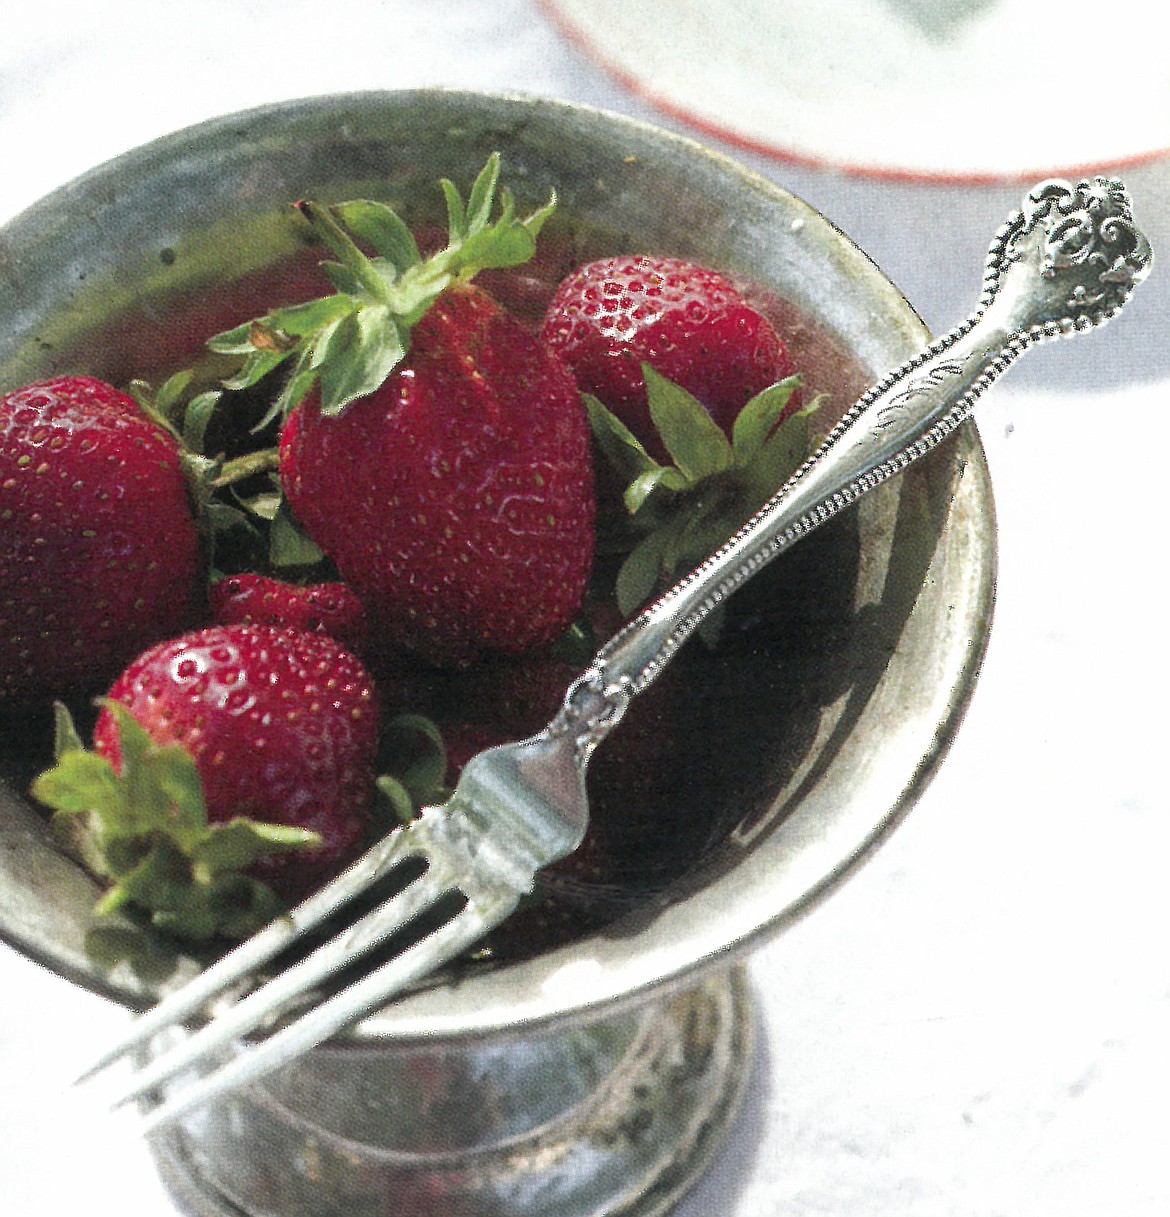 Chilled whole strawberries are a classic treat served with an elegant vintage strawberry fork.